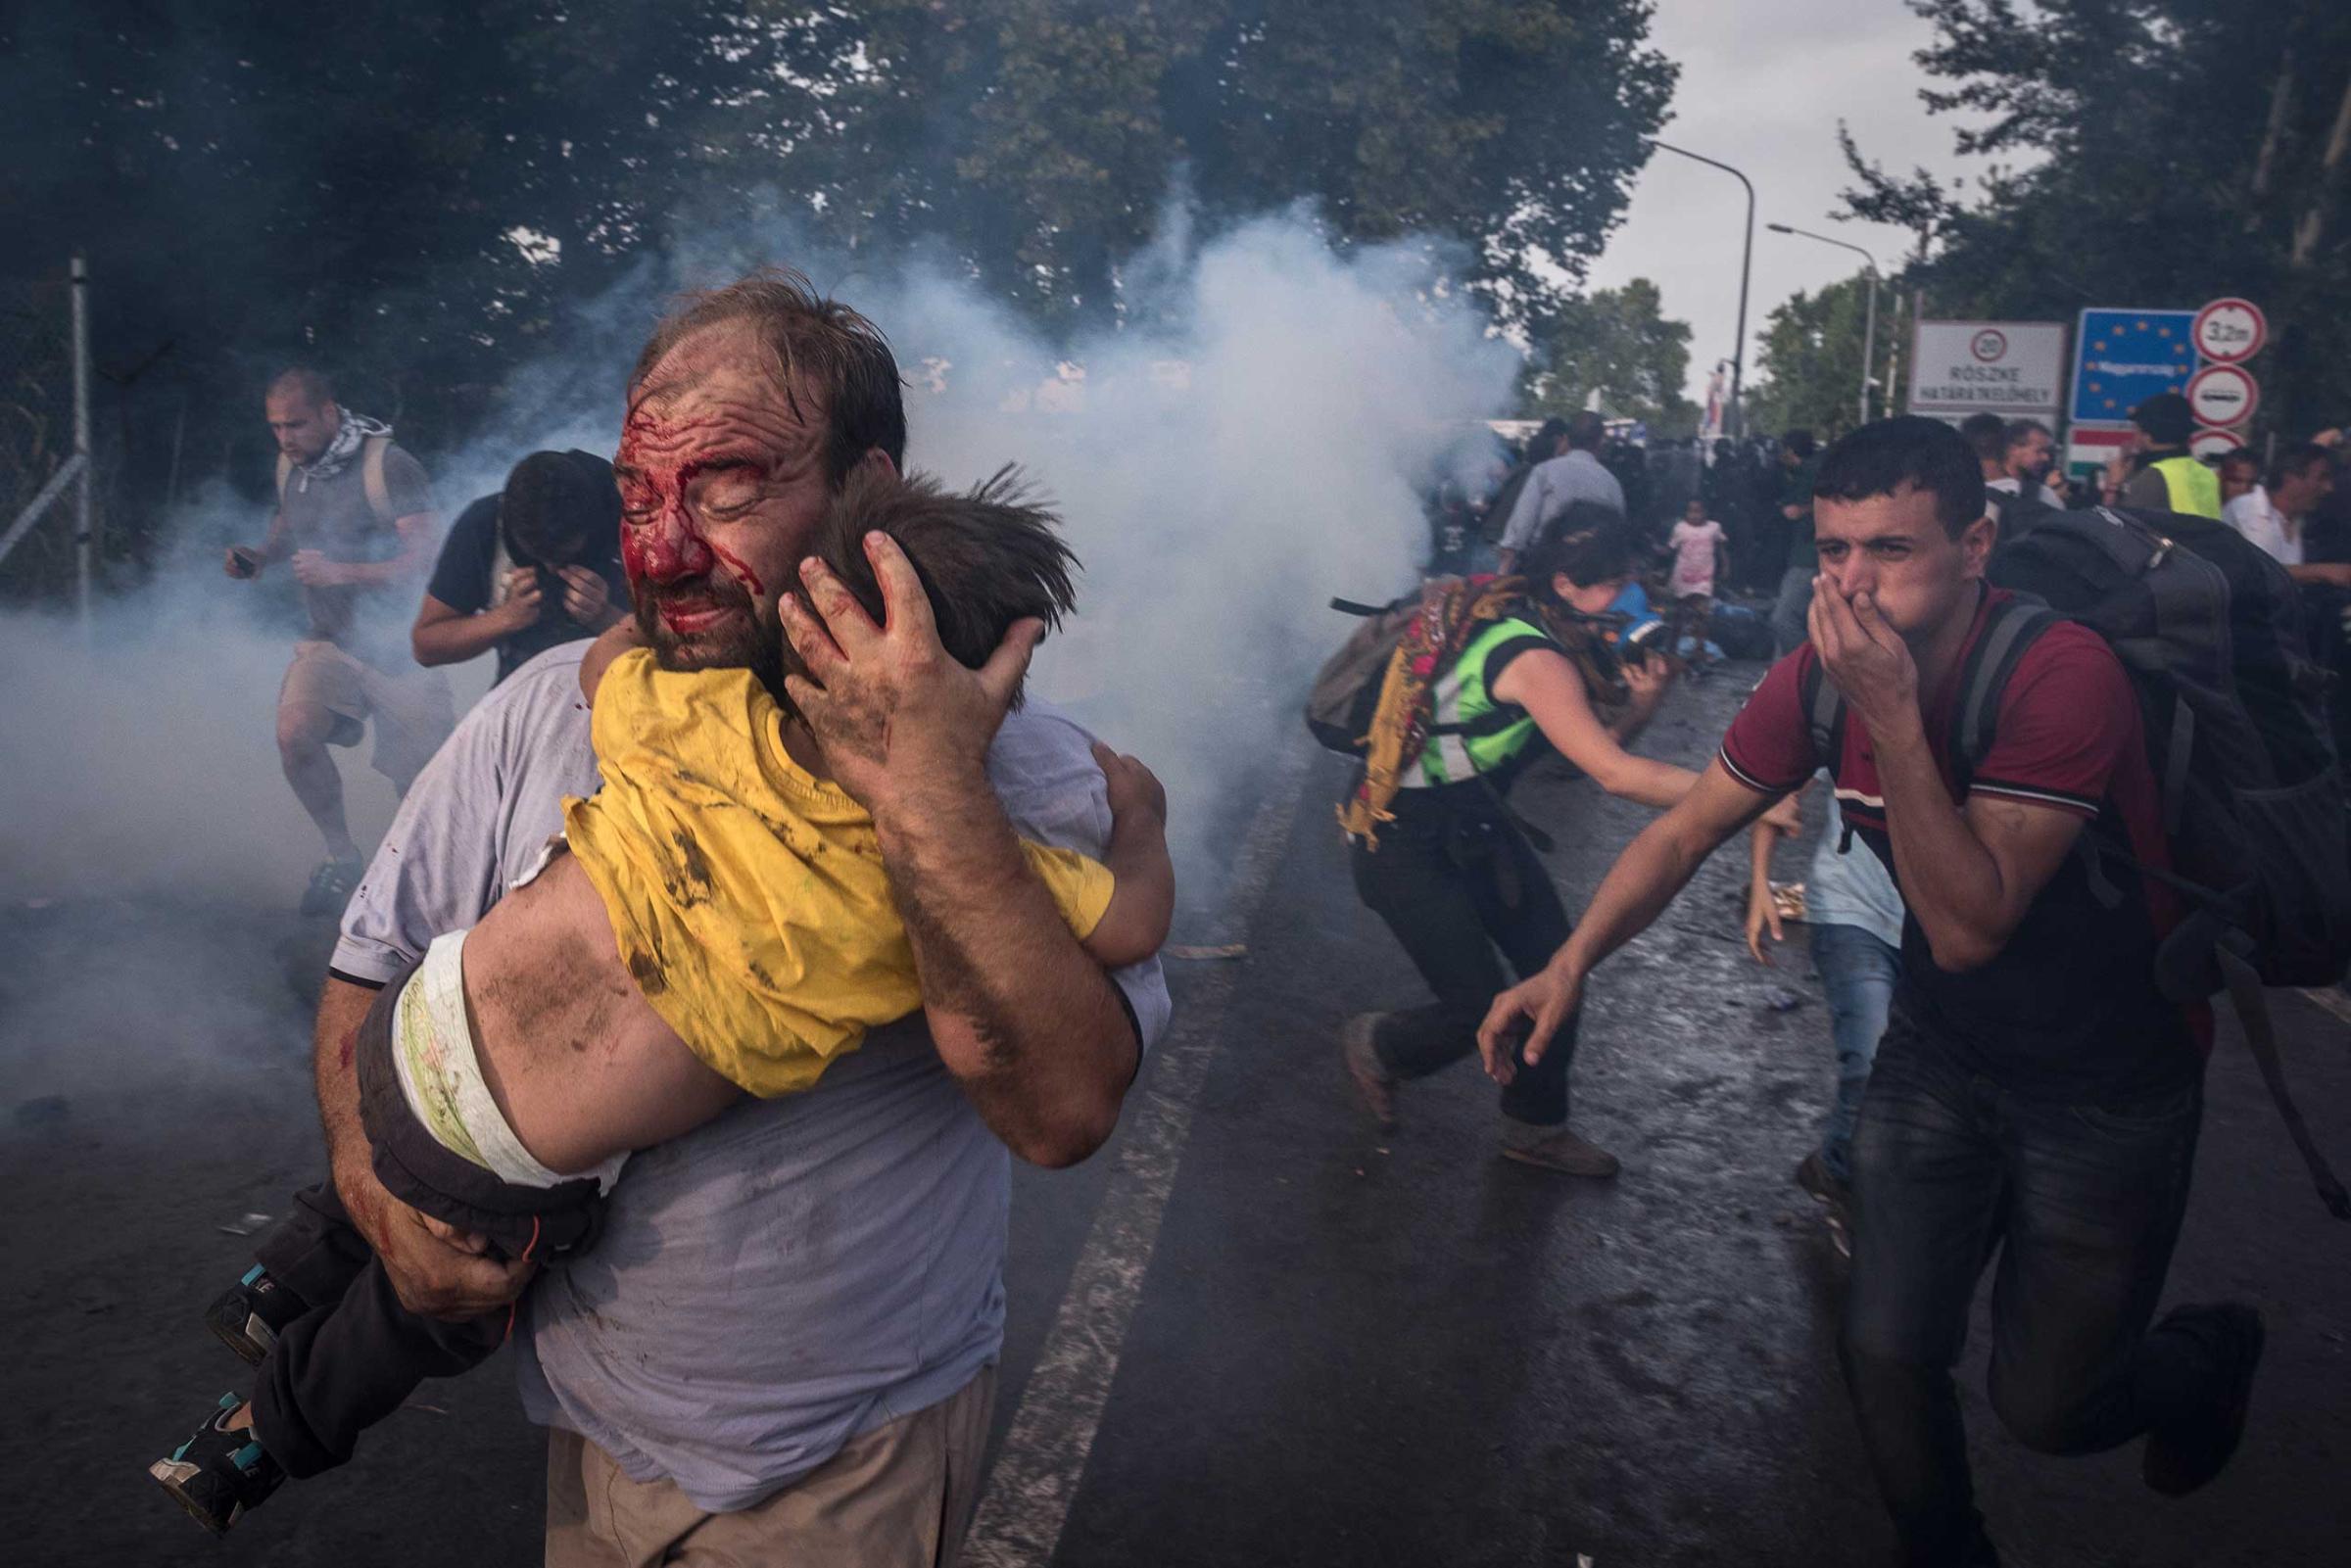 A tries to man shield his child from police beatings and tear gas at the border crossing in Horgos, Serbia. Sept. 16, 2015.